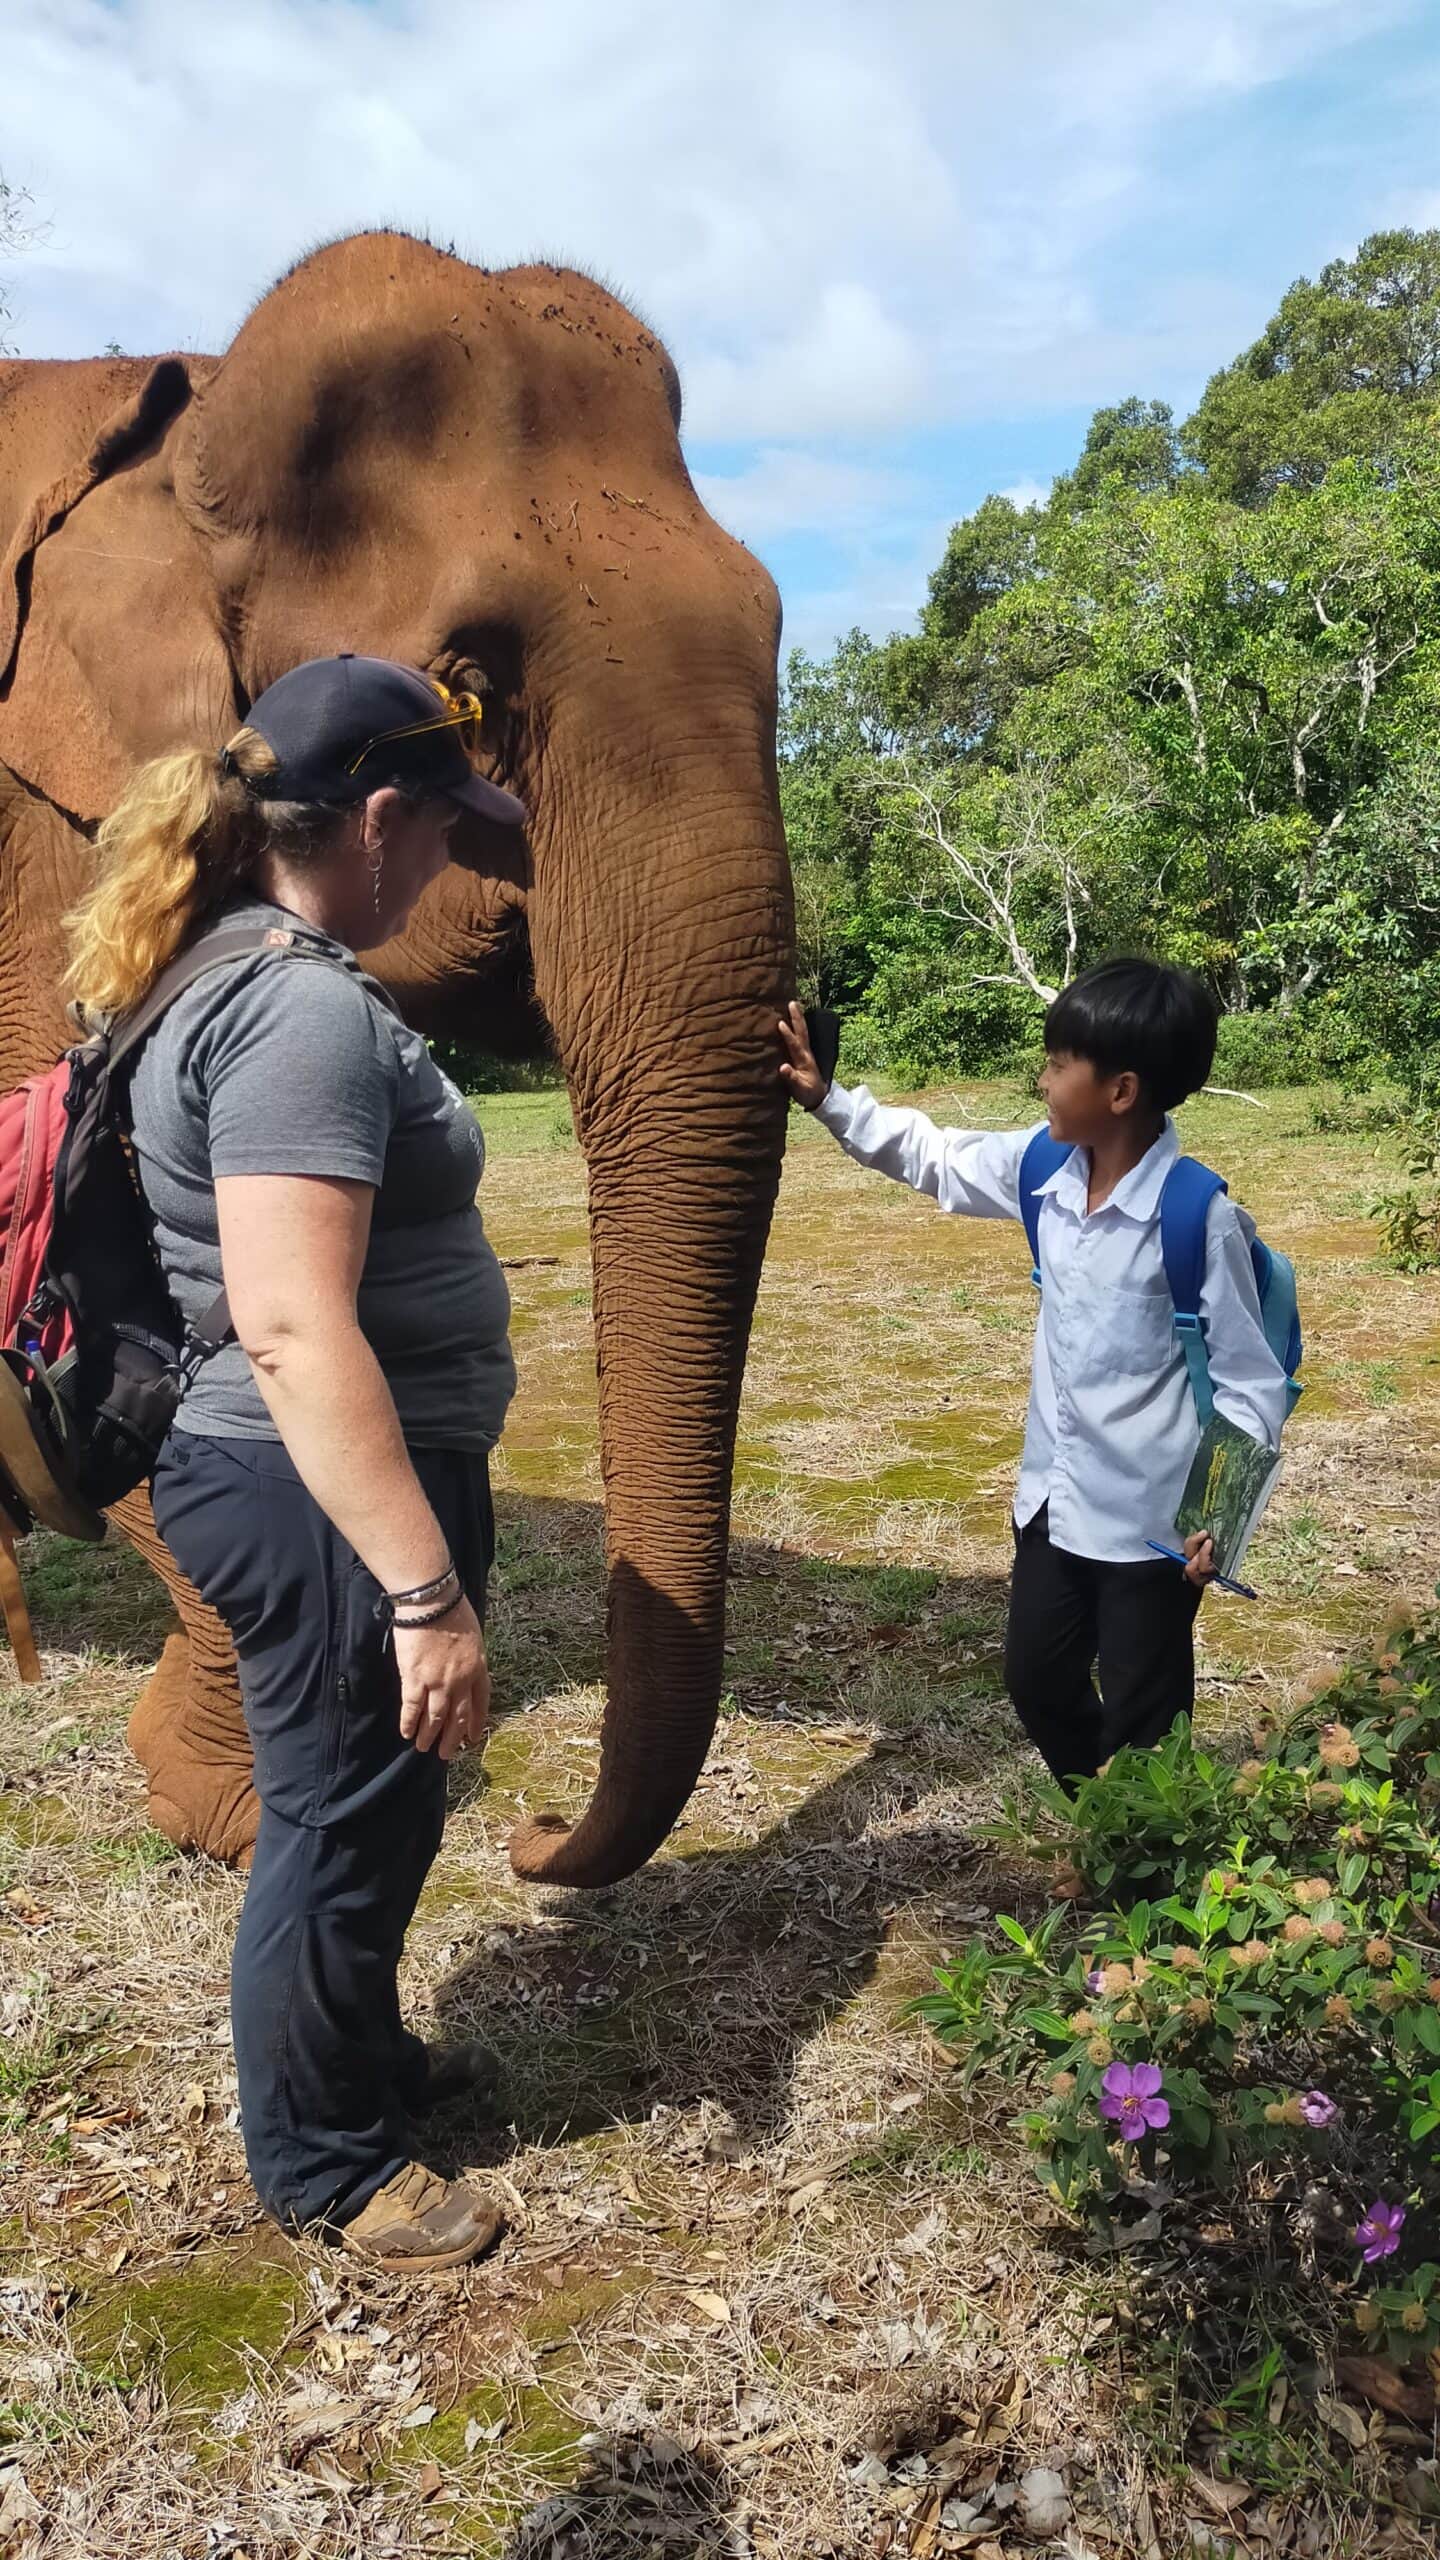 A child experiences meeting an elephant under supervision from an adult at Elephant Valley Project, Mondulkiri, Cambodia